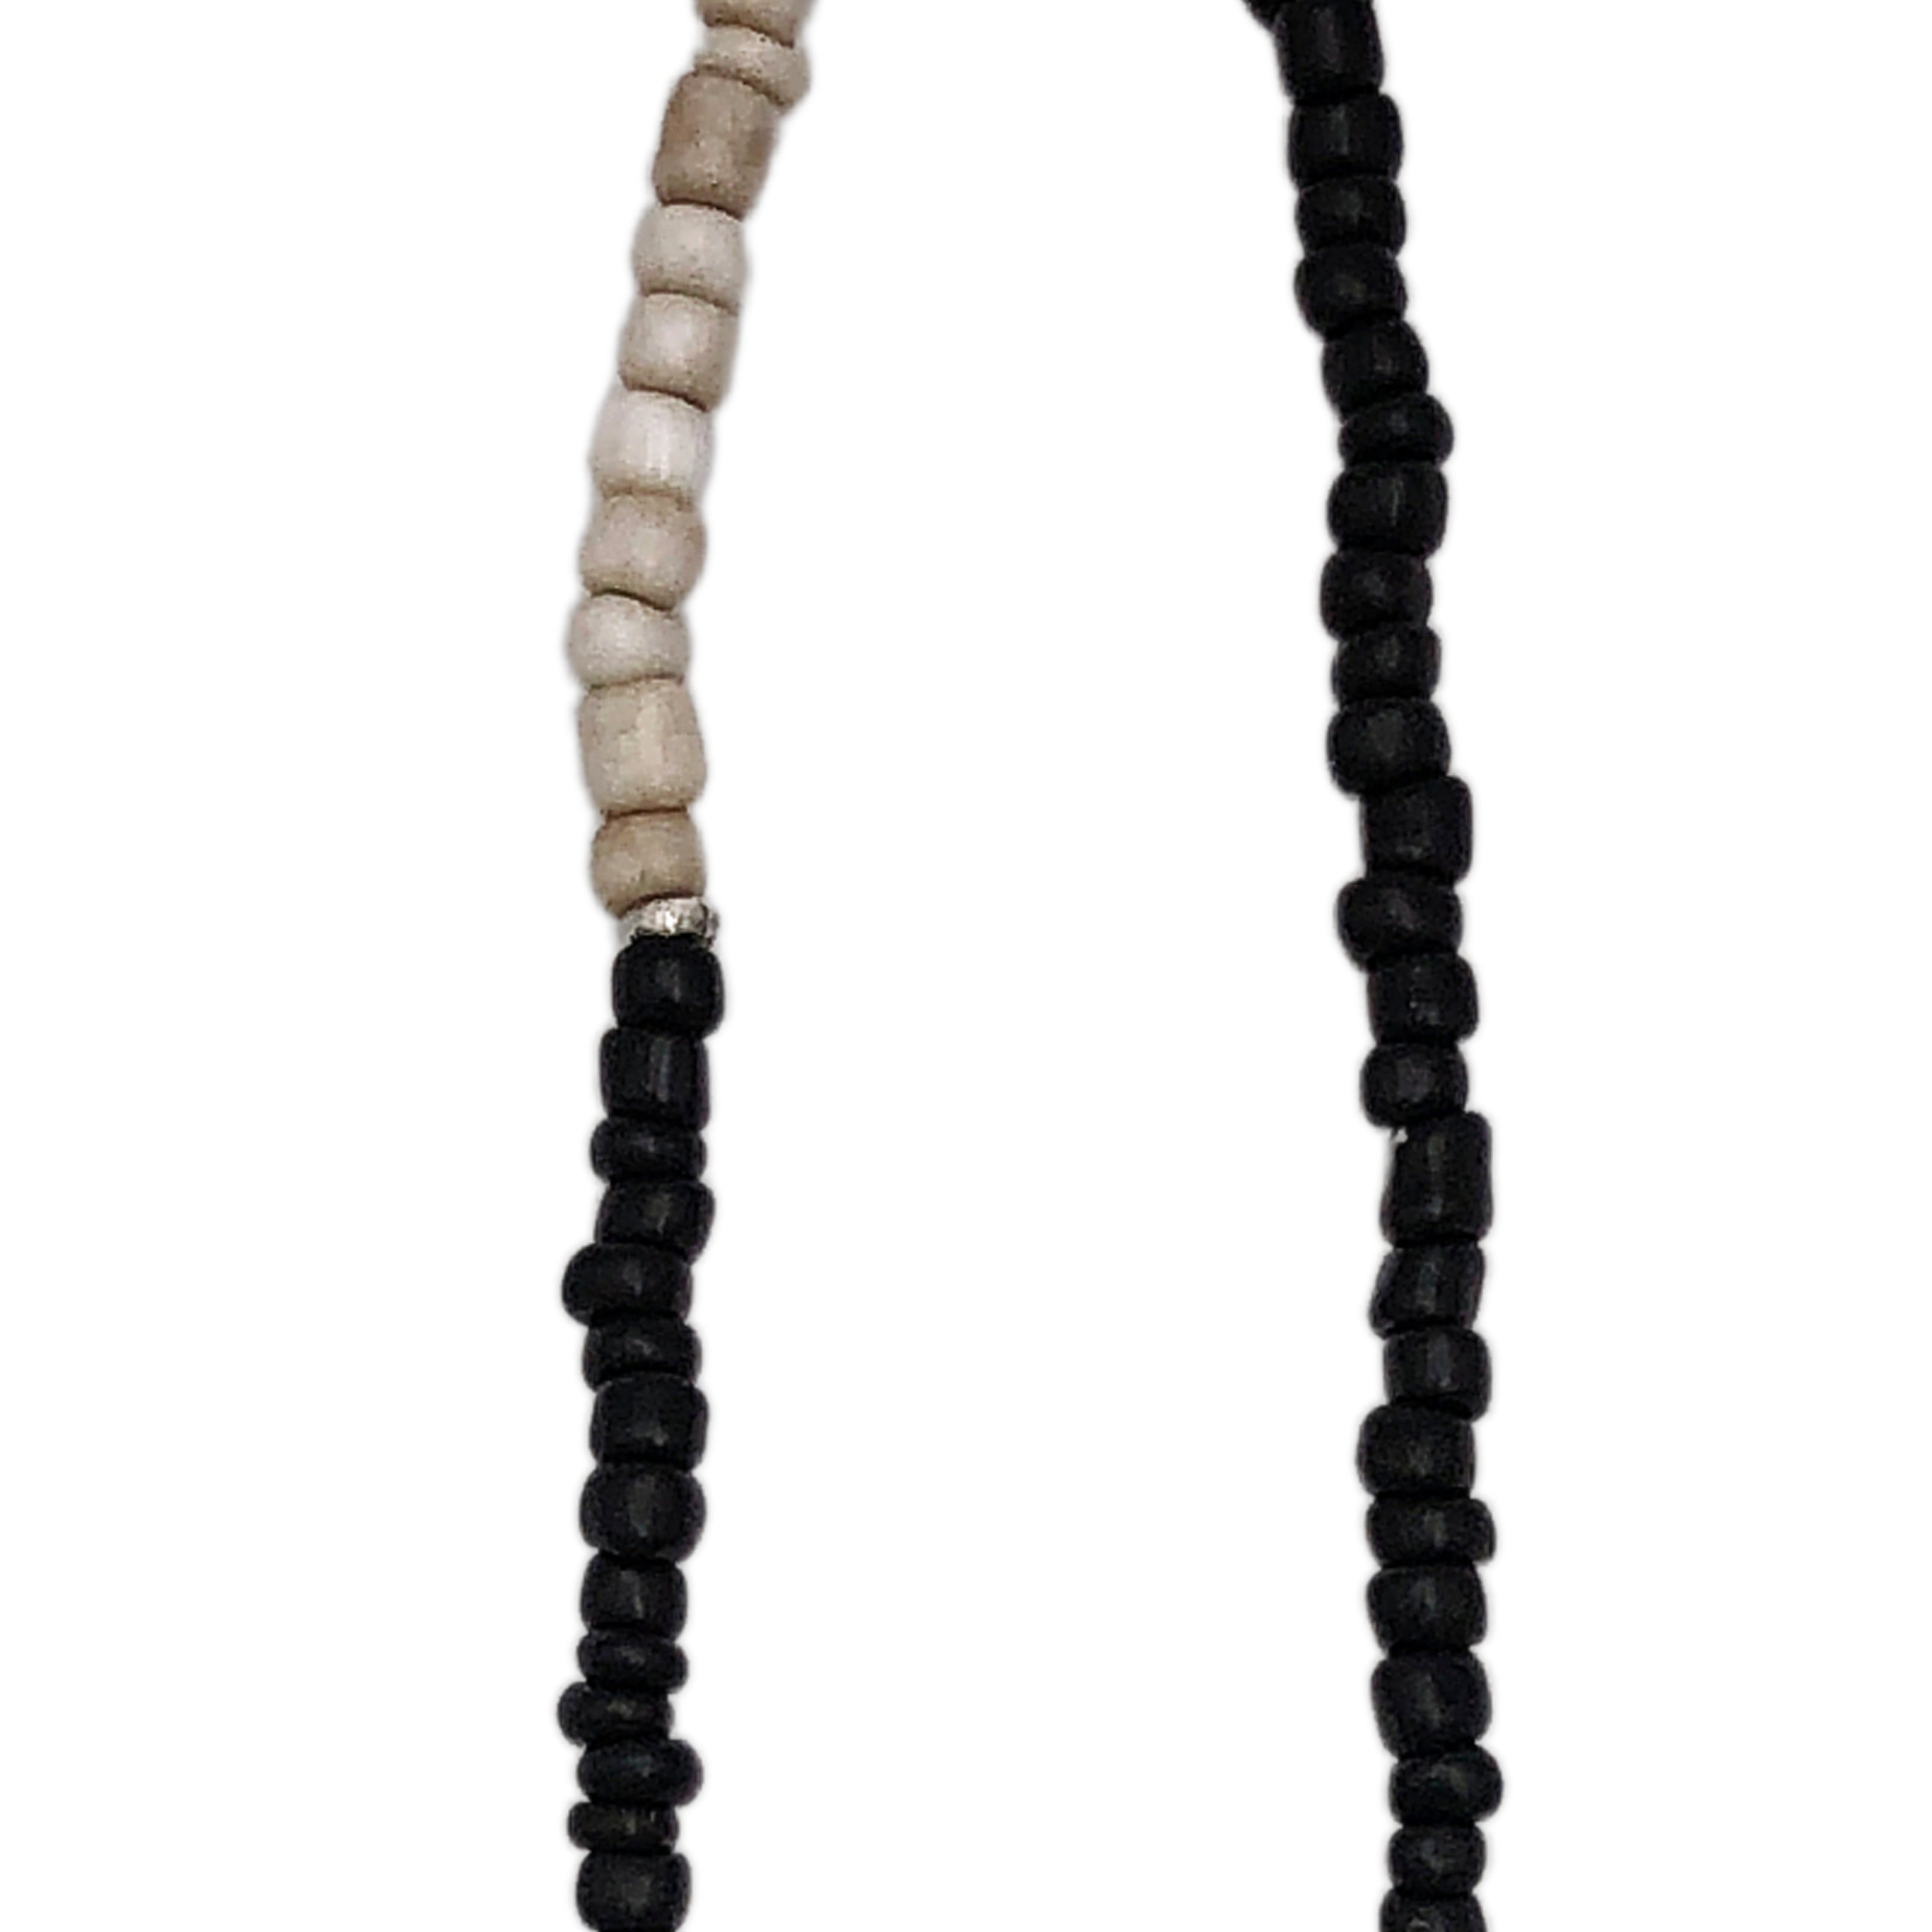 Black and White African Bead block design necklace